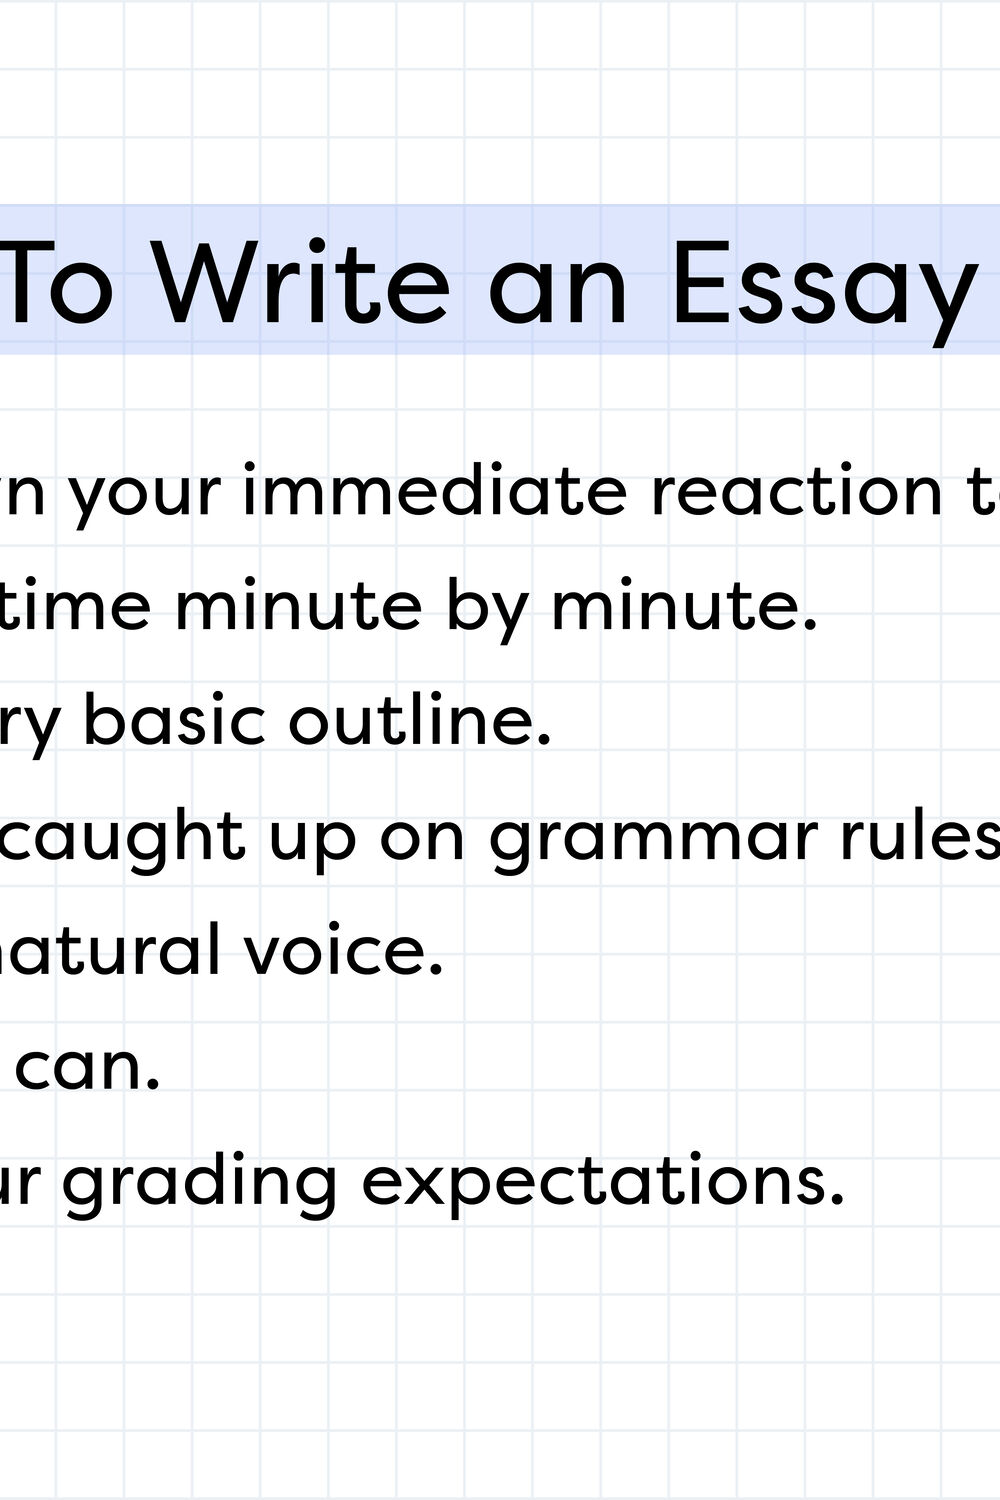 how can i write an essay fast